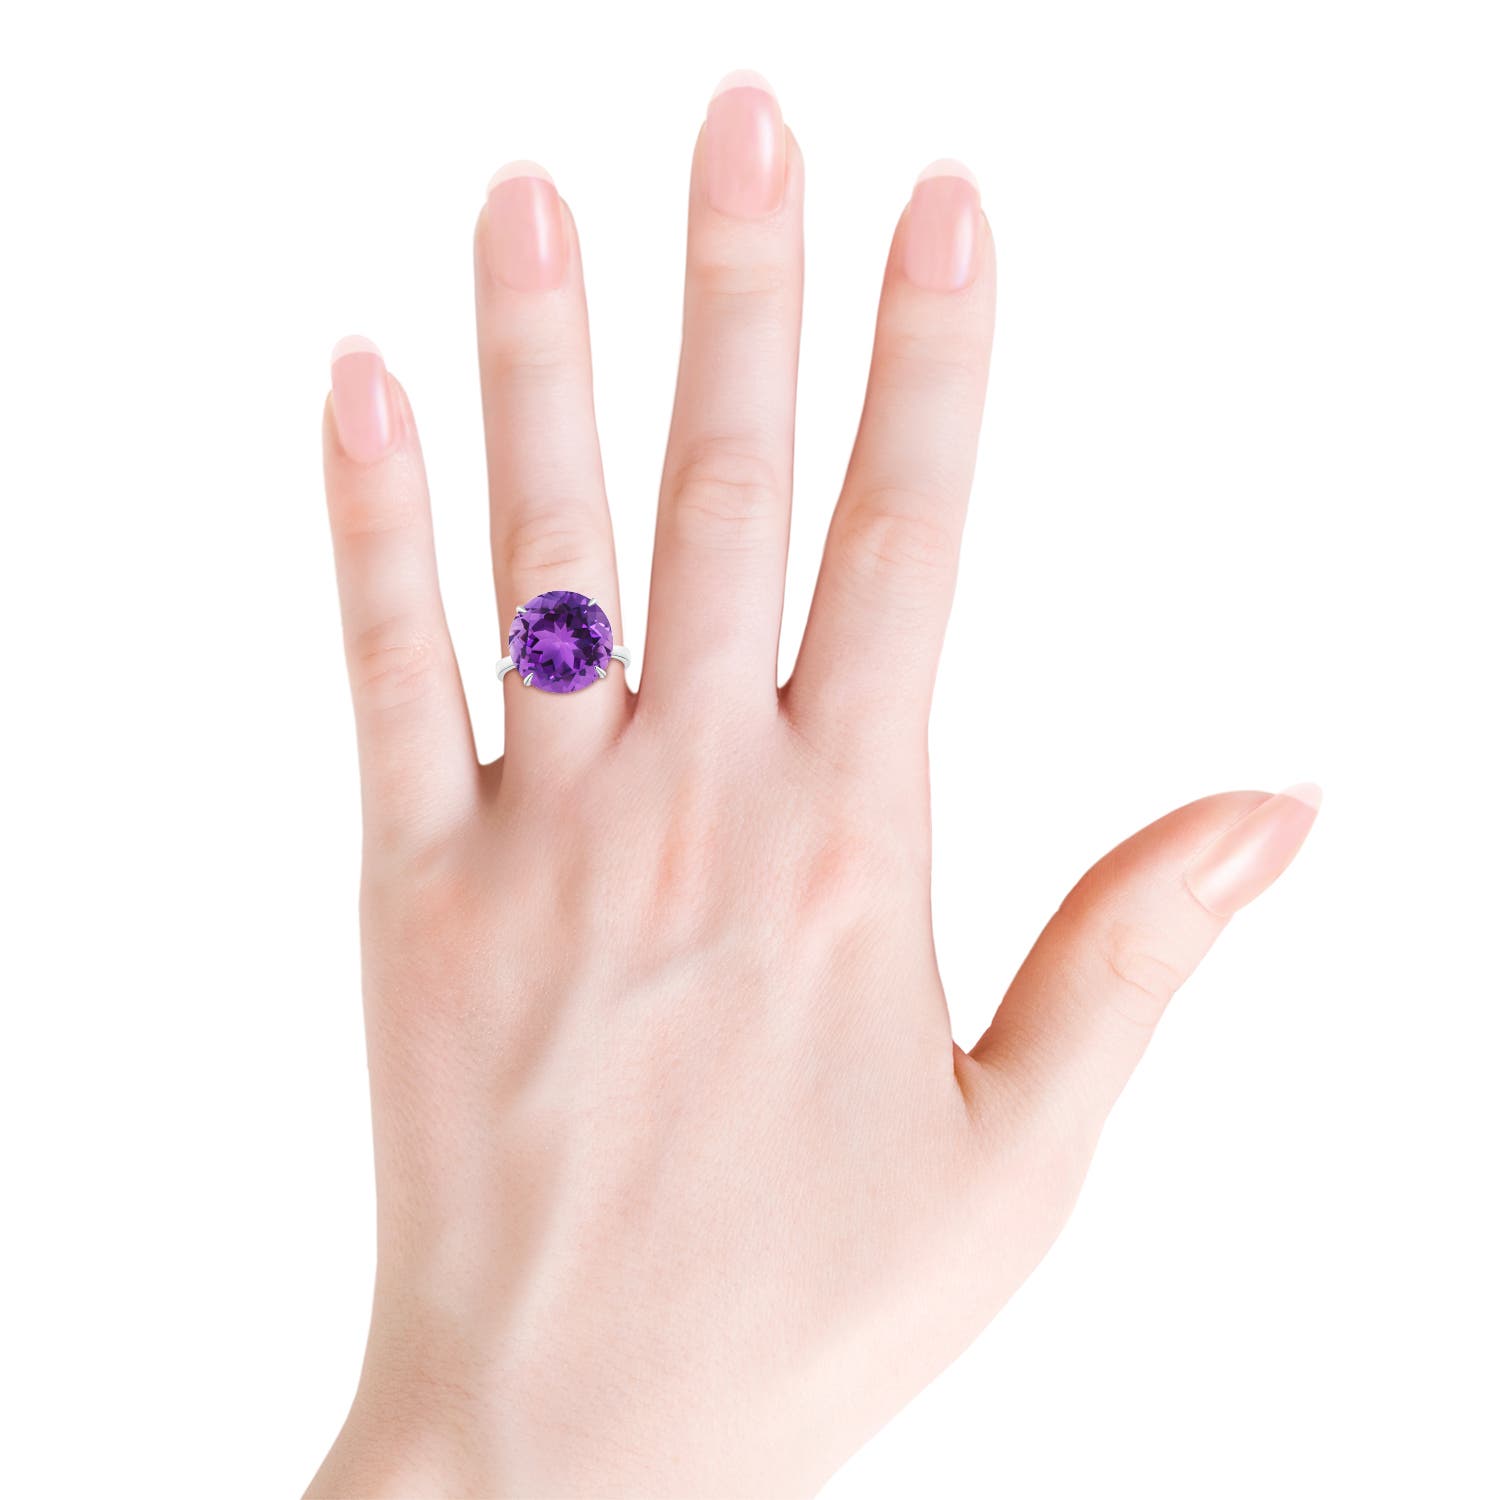 AAA - Amethyst / 8.5 CT / 14 KT White Gold